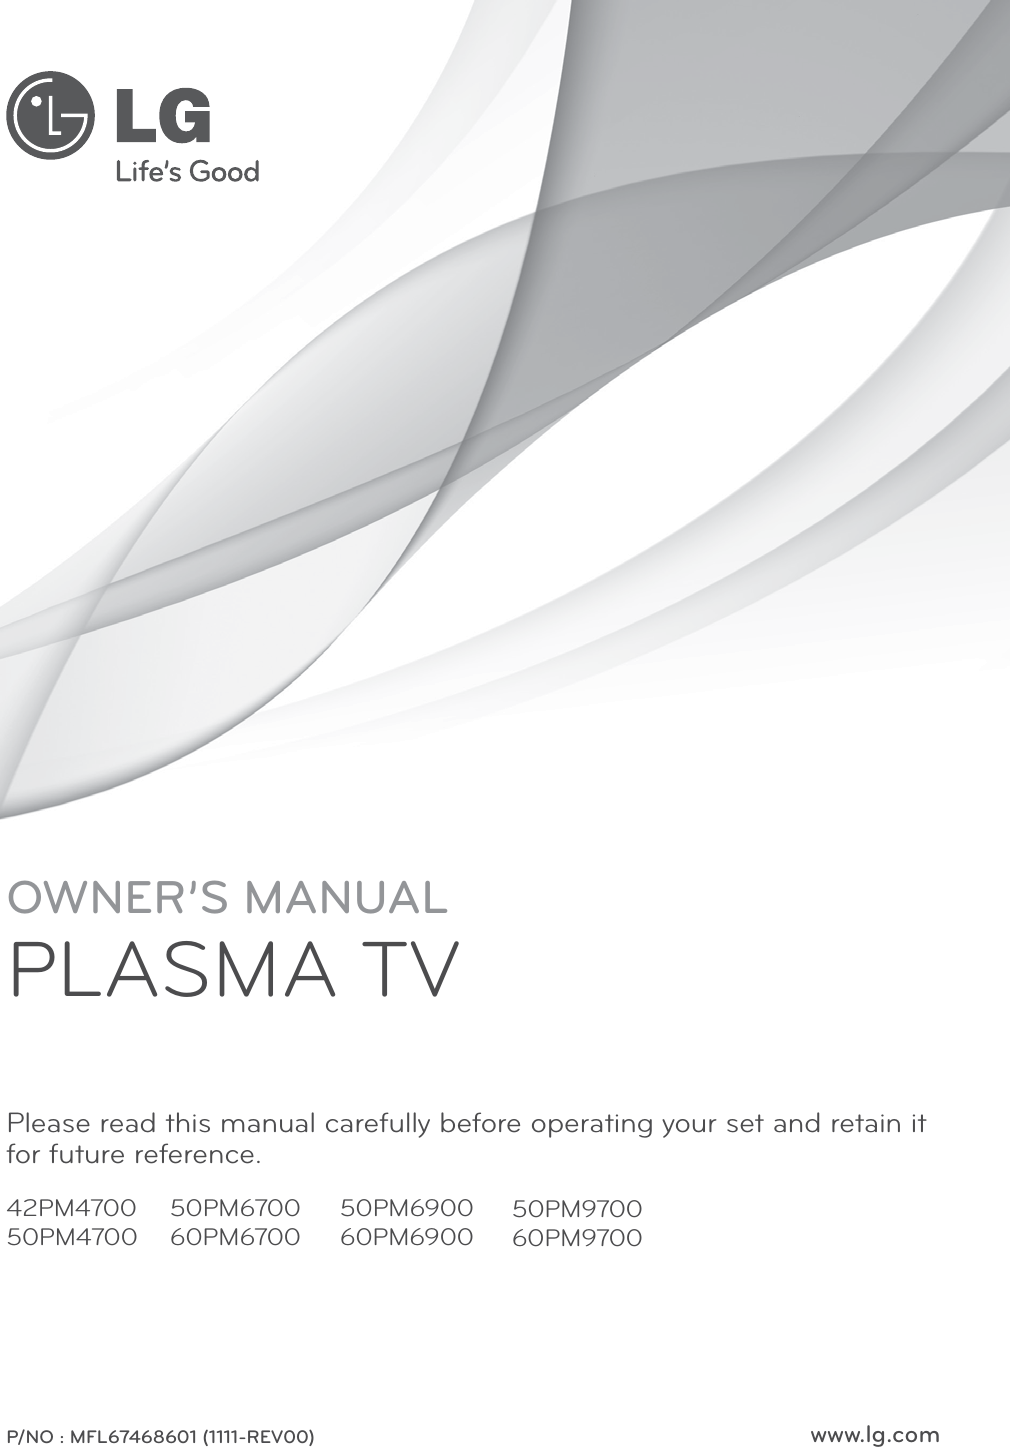 www.lg.comOWNER’S MANUALPLASMA TVPlease read this manual carefully before operating your set and retain it for future reference.P/NO : MFL67468601 (1111-REV00)42PM470050PM470050PM690060PM690050PM970060PM970050PM670060PM6700